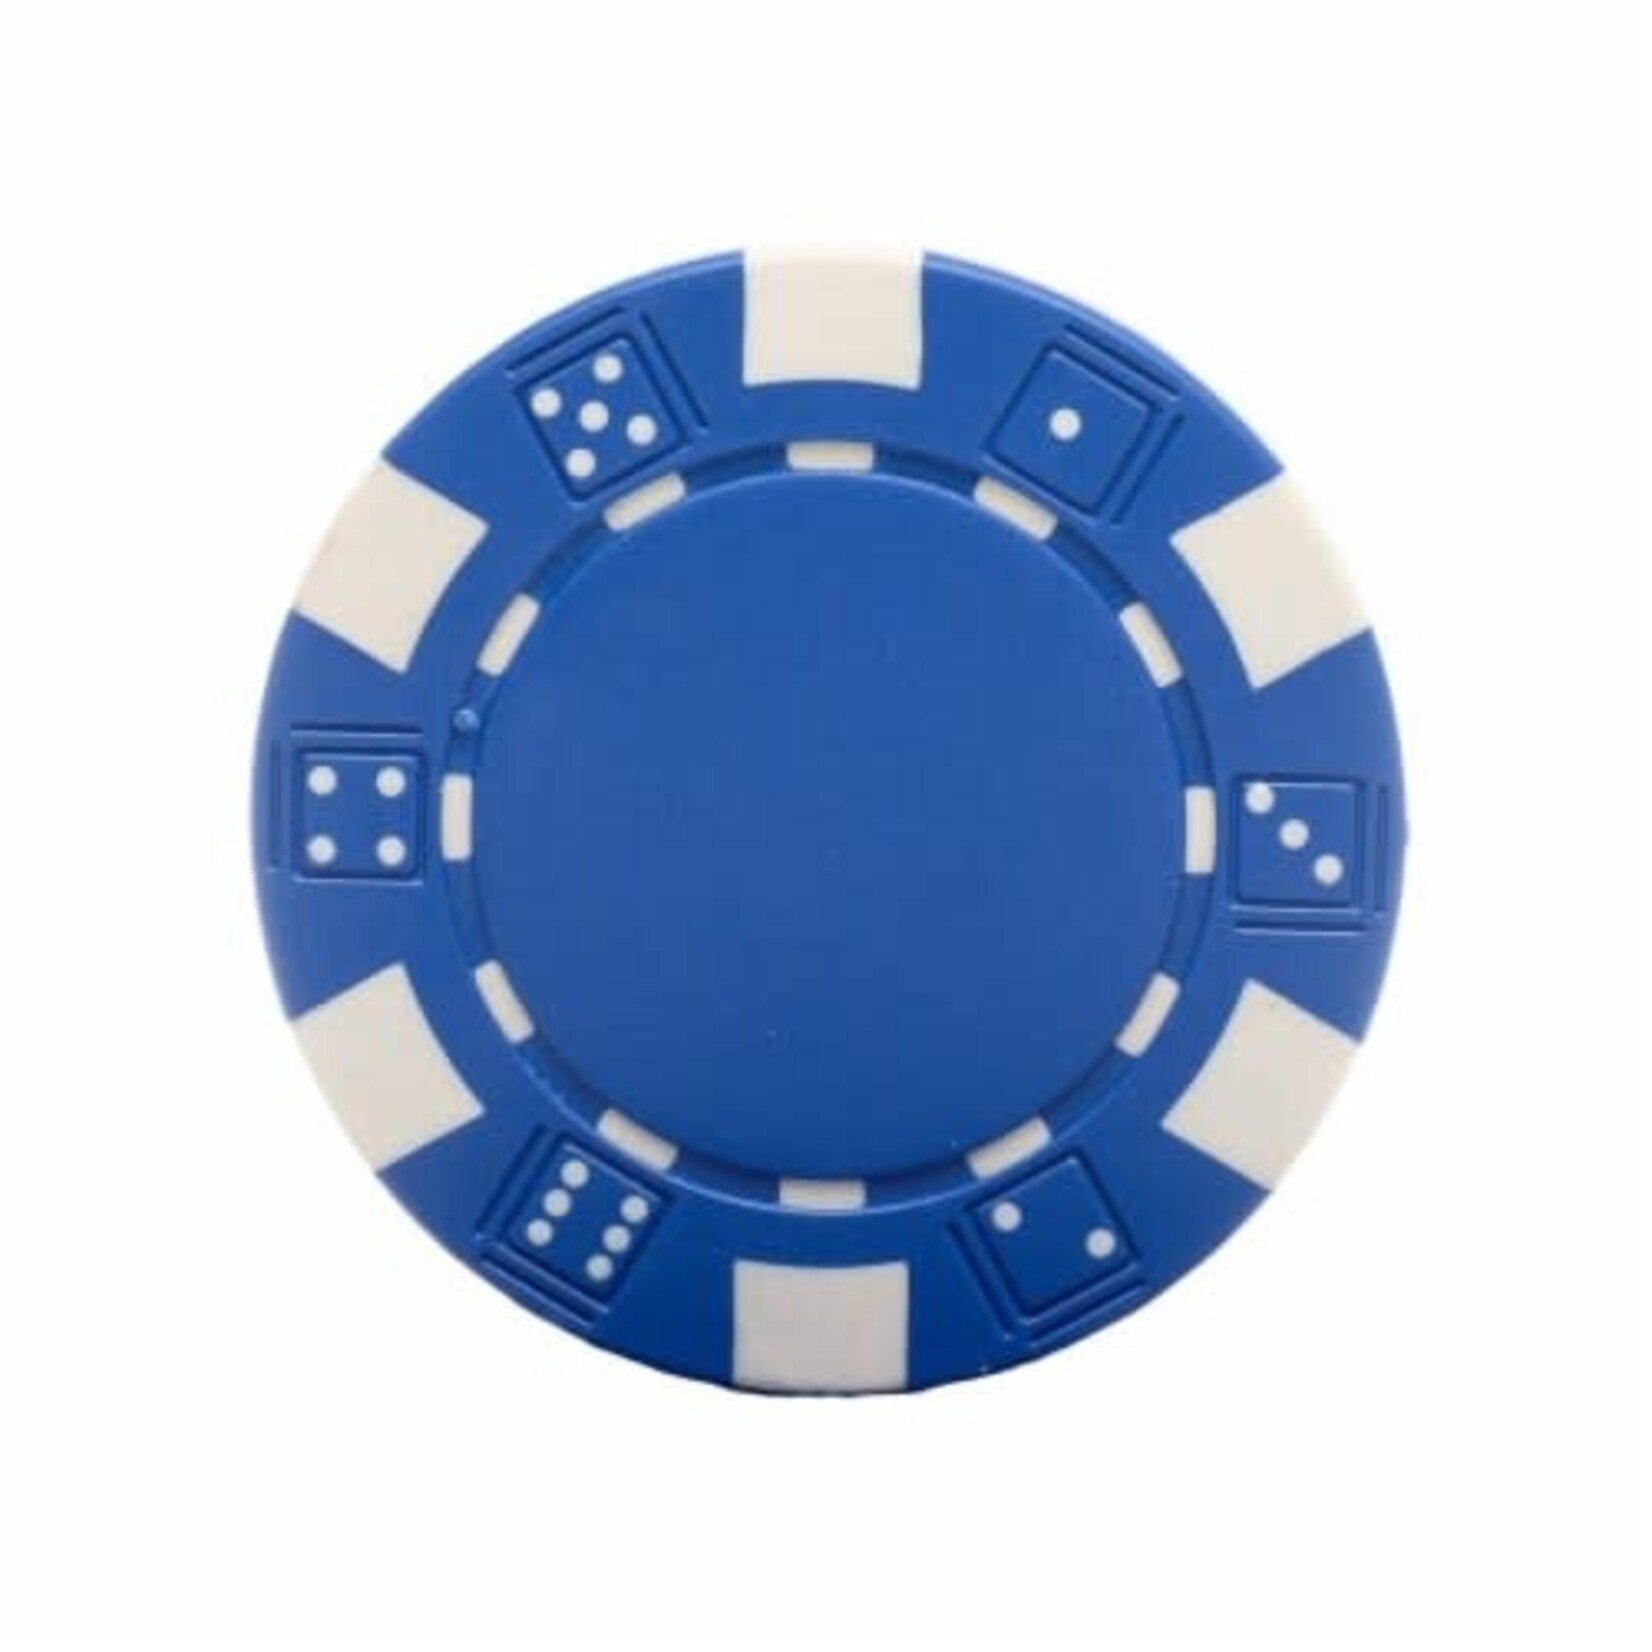 Wood Expressions Clay Poker Chips: Blue (25)